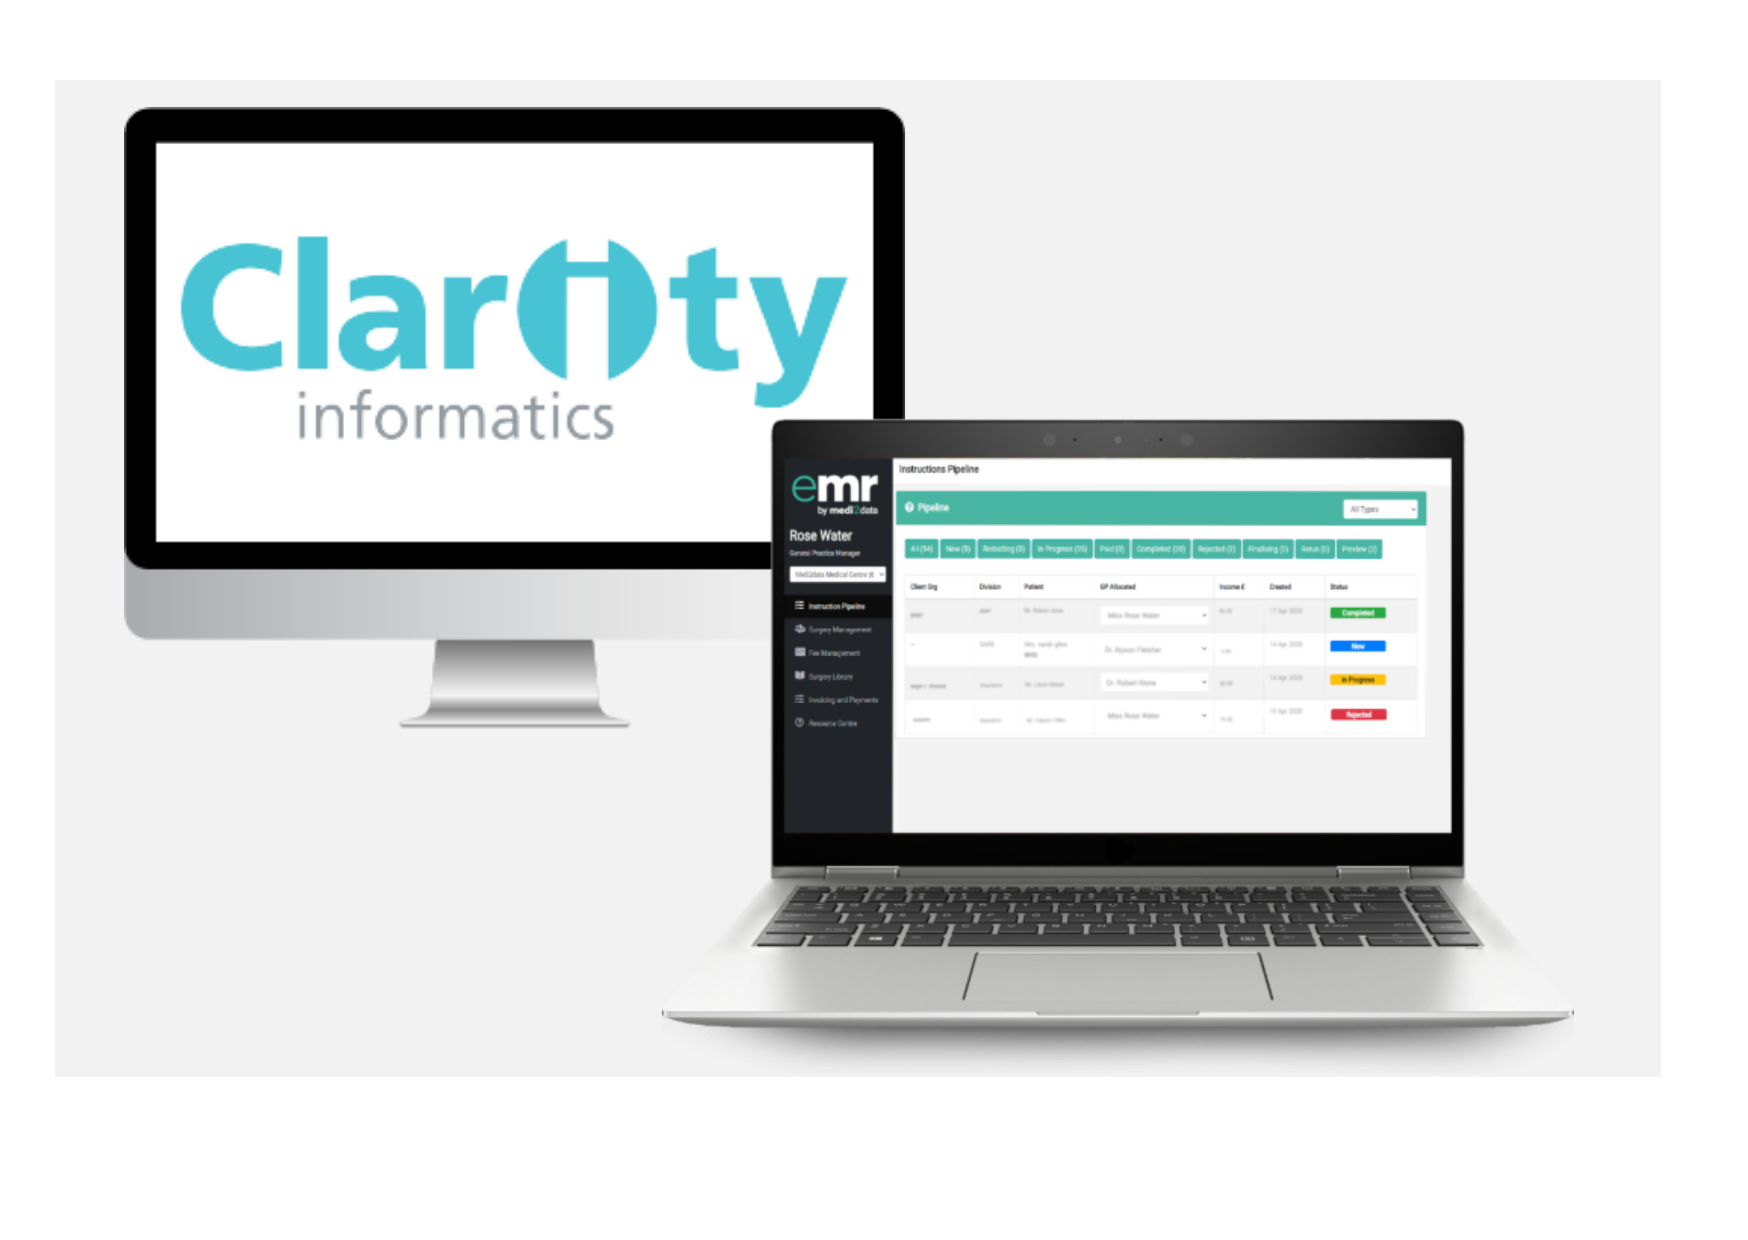 Clarity and medidata